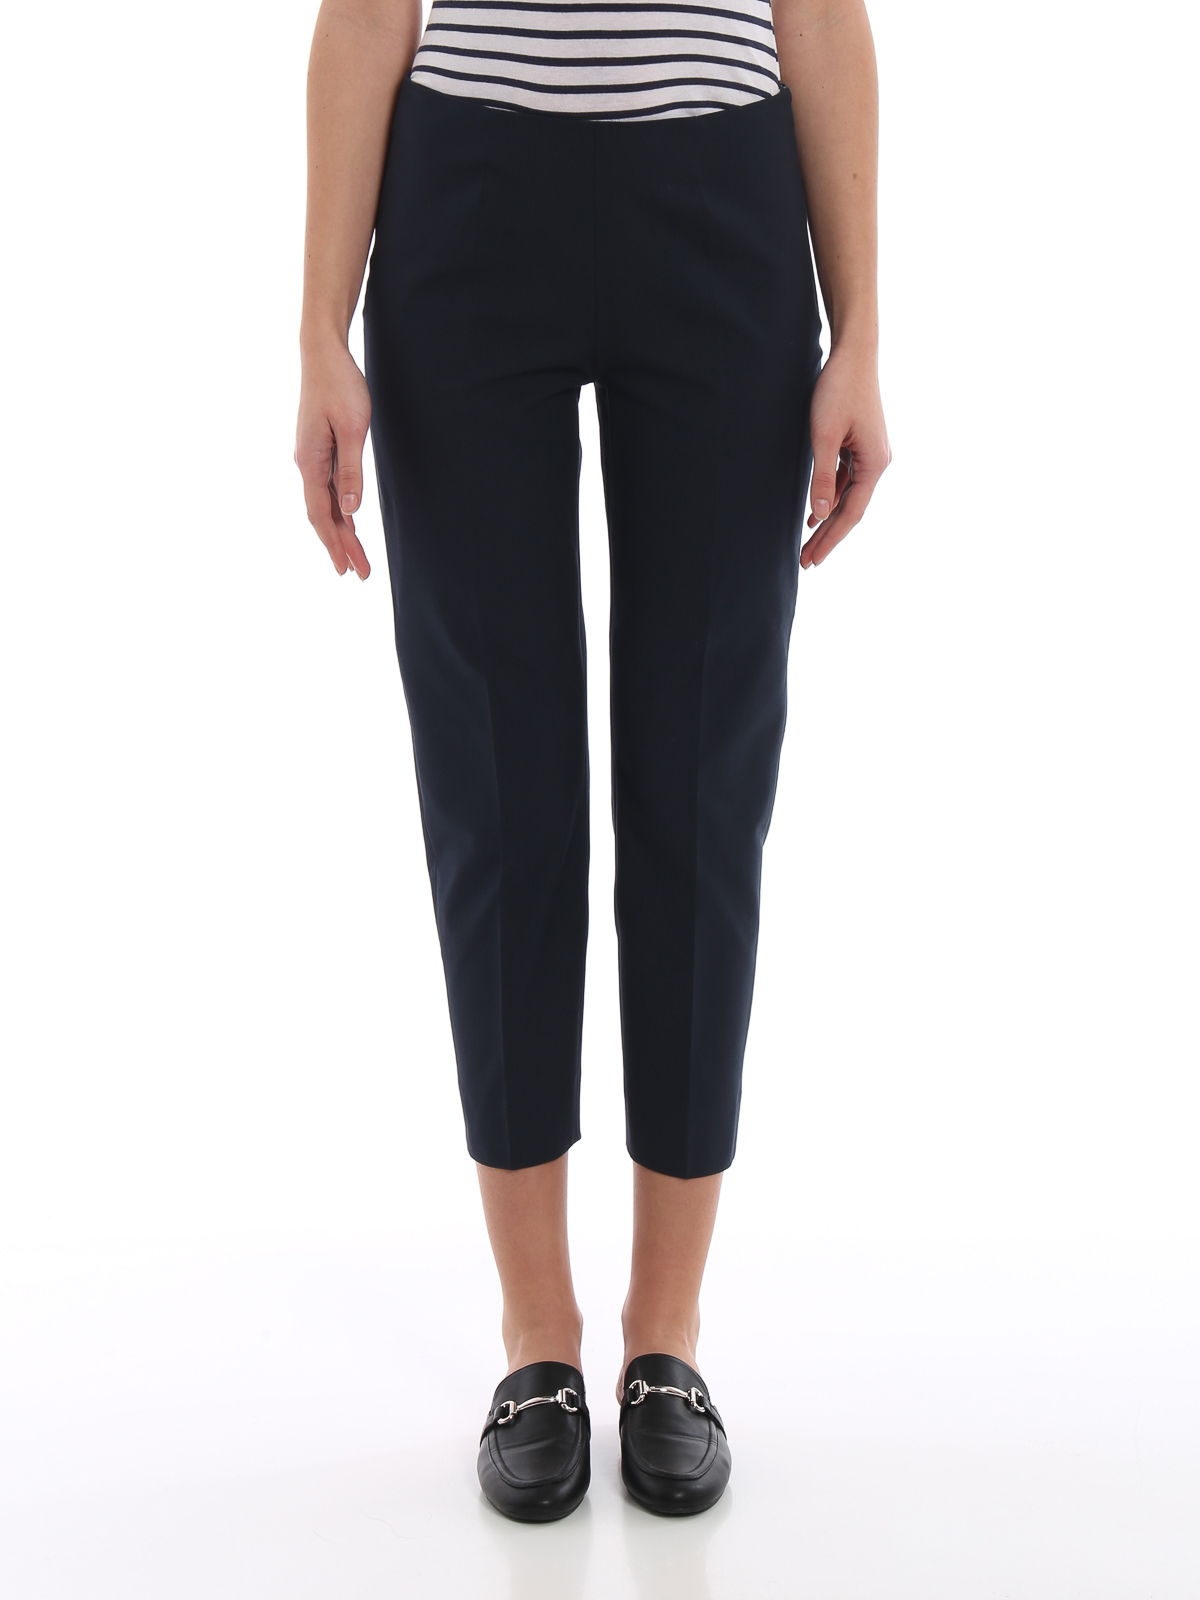 casual tapered pants